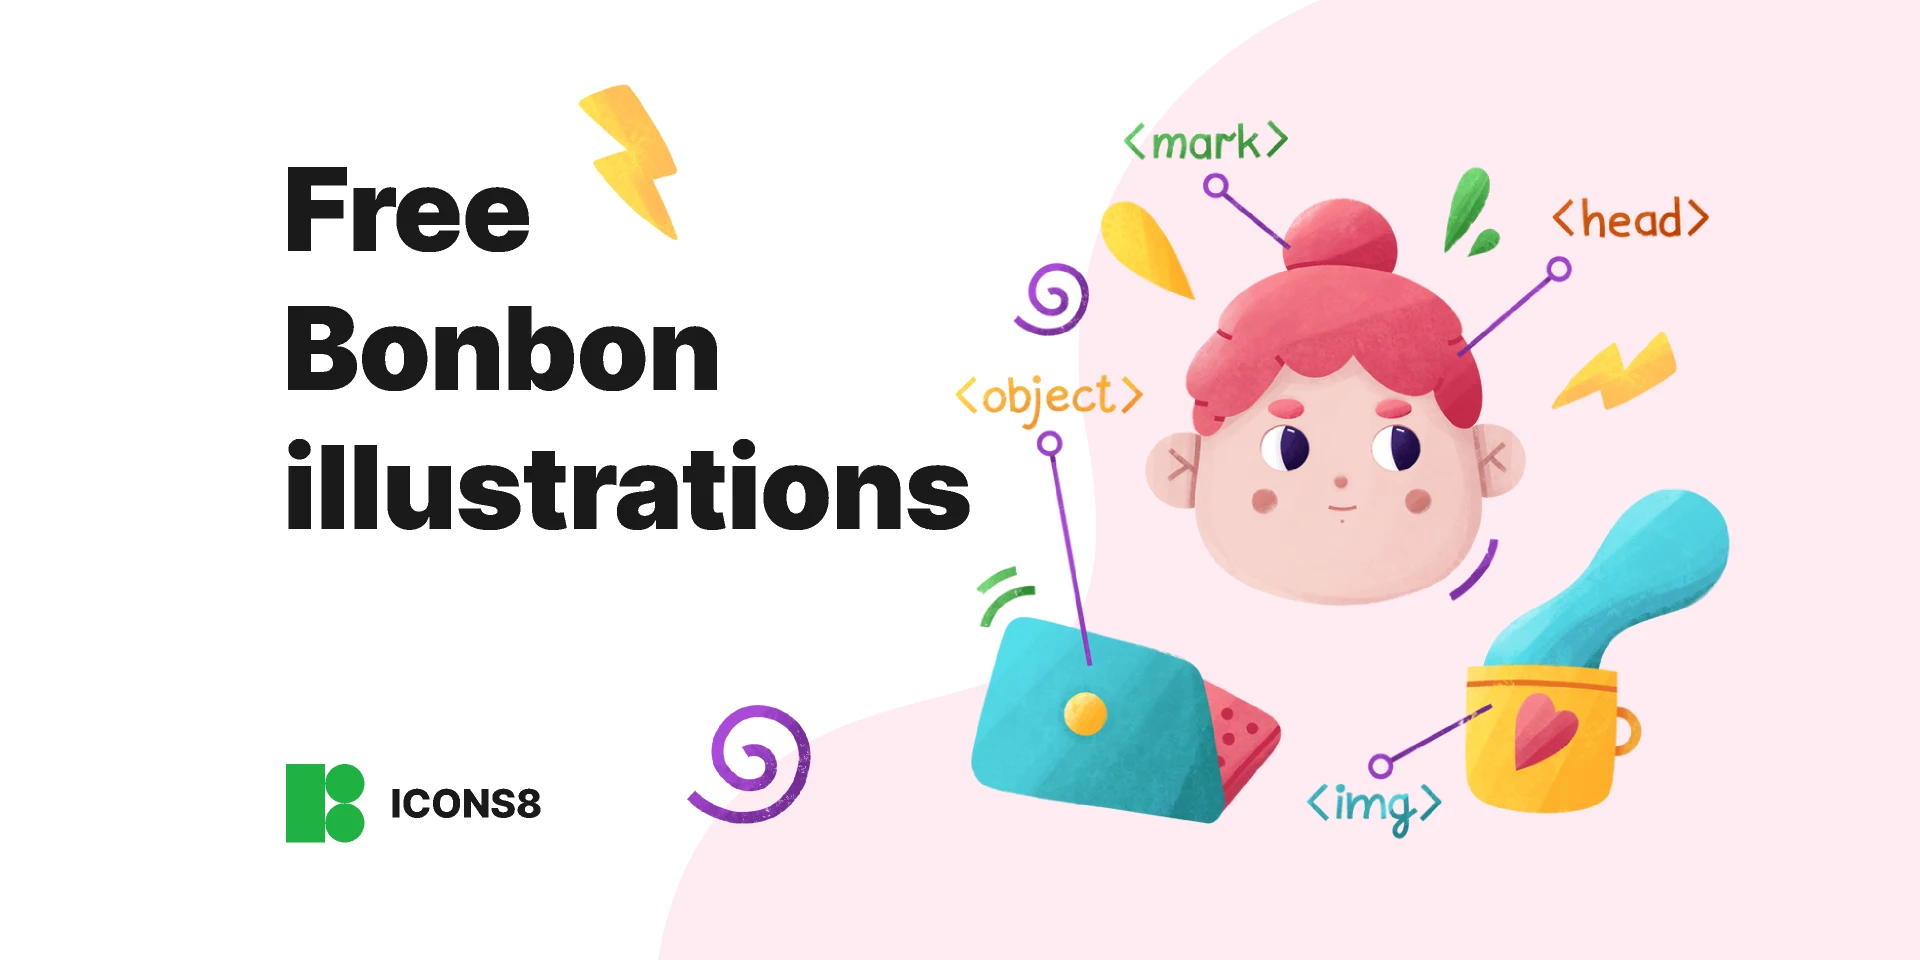 Free Bonbon illustrations in PNG for Figma and Adobe XD